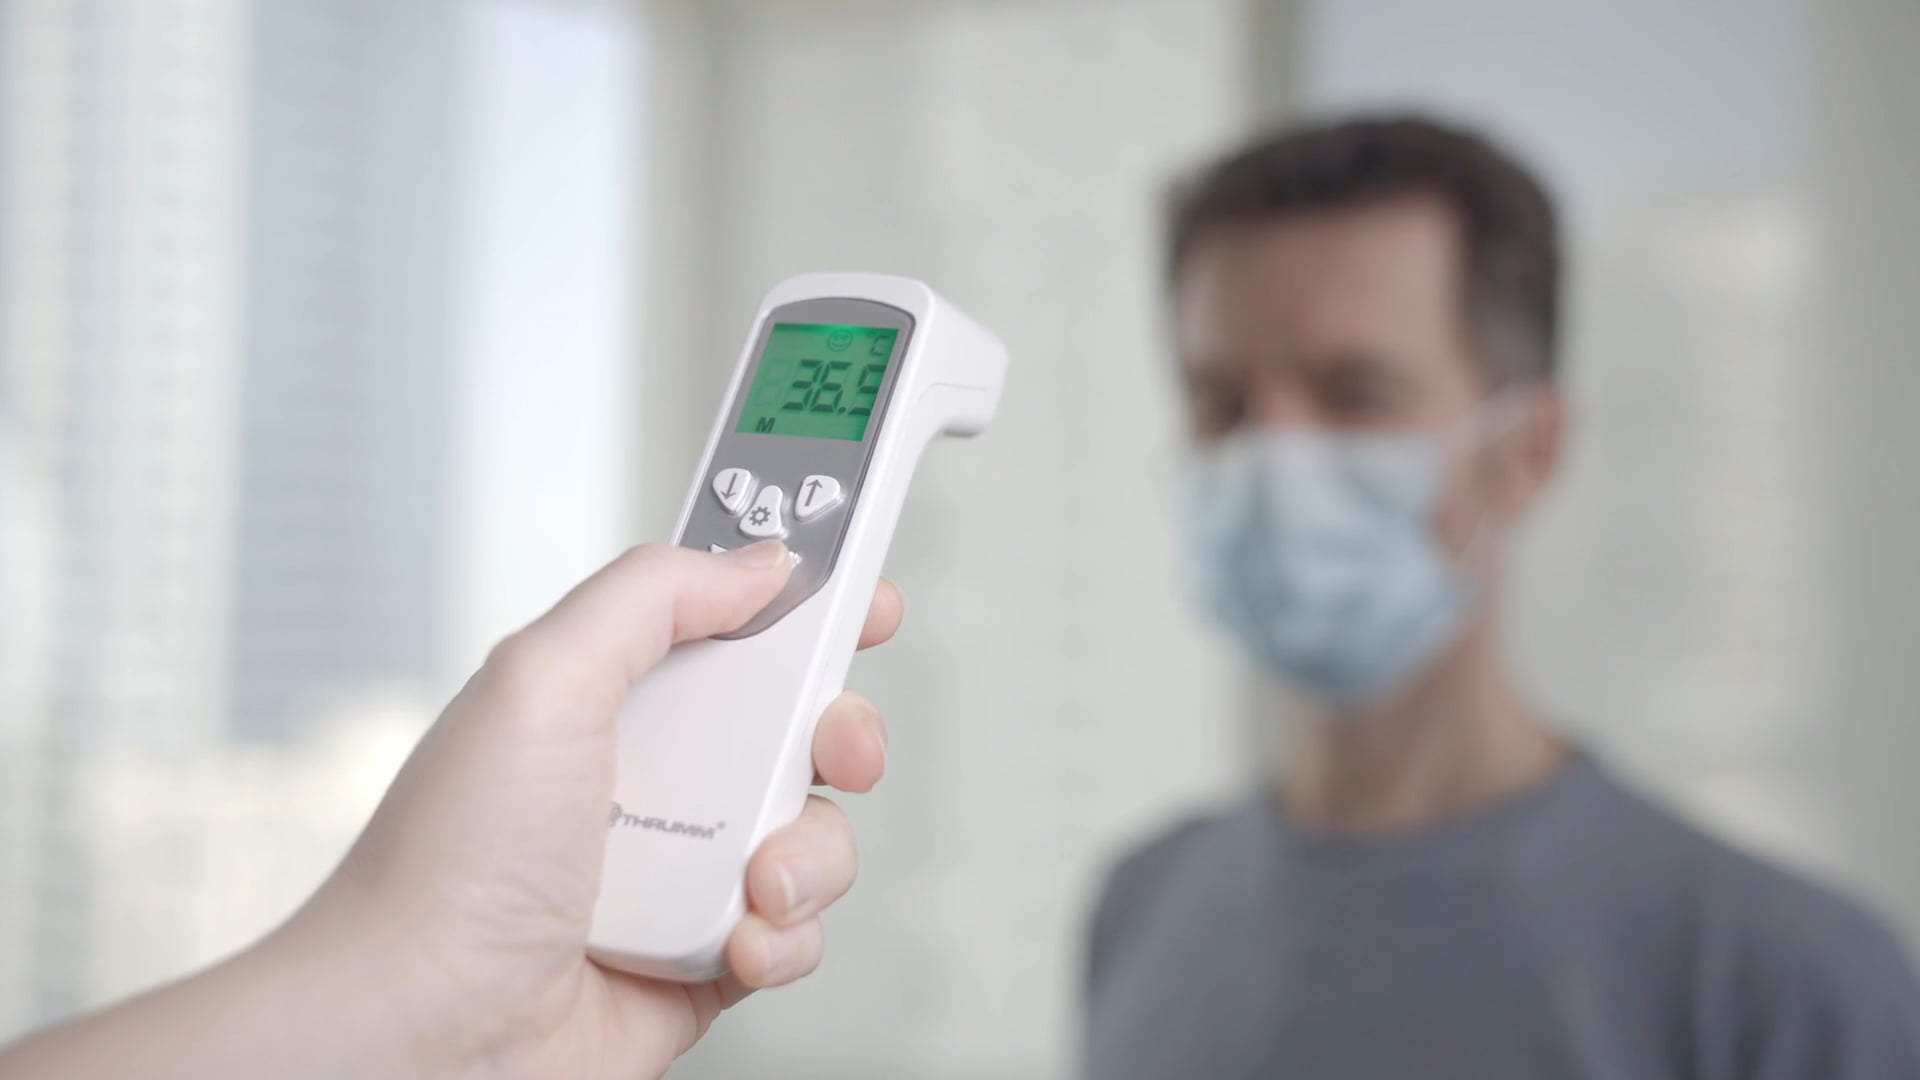 Featured image for “Product Video – Digital Thermometer”